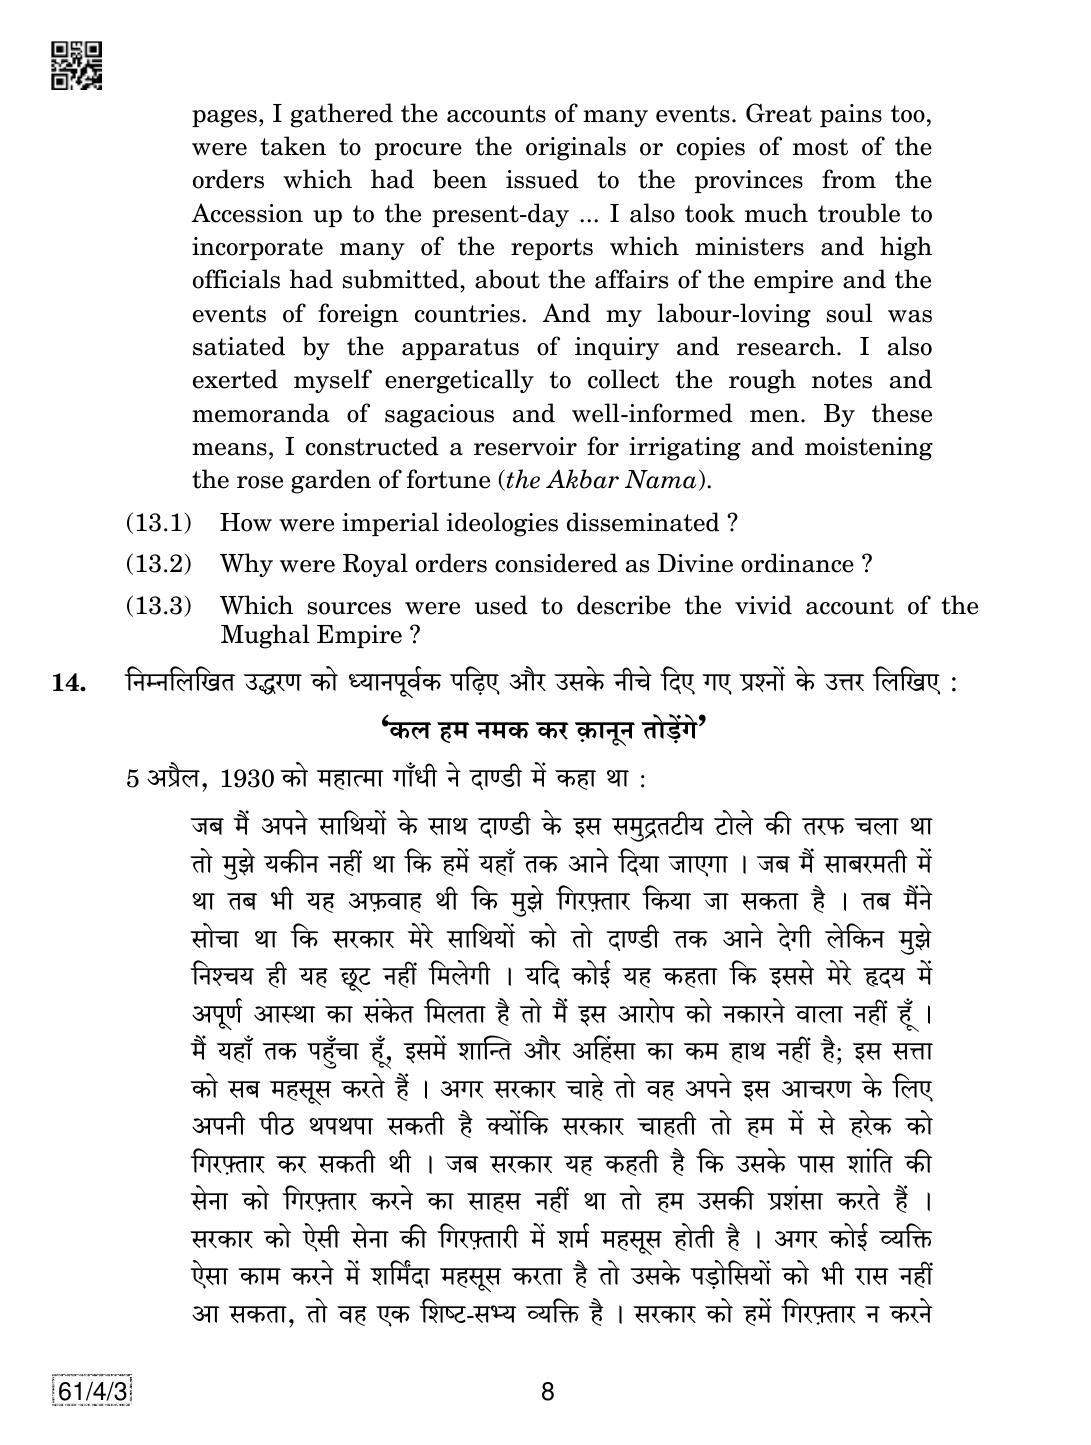 CBSE Class 12 61-4-3 History 2019 Question Paper - Page 8